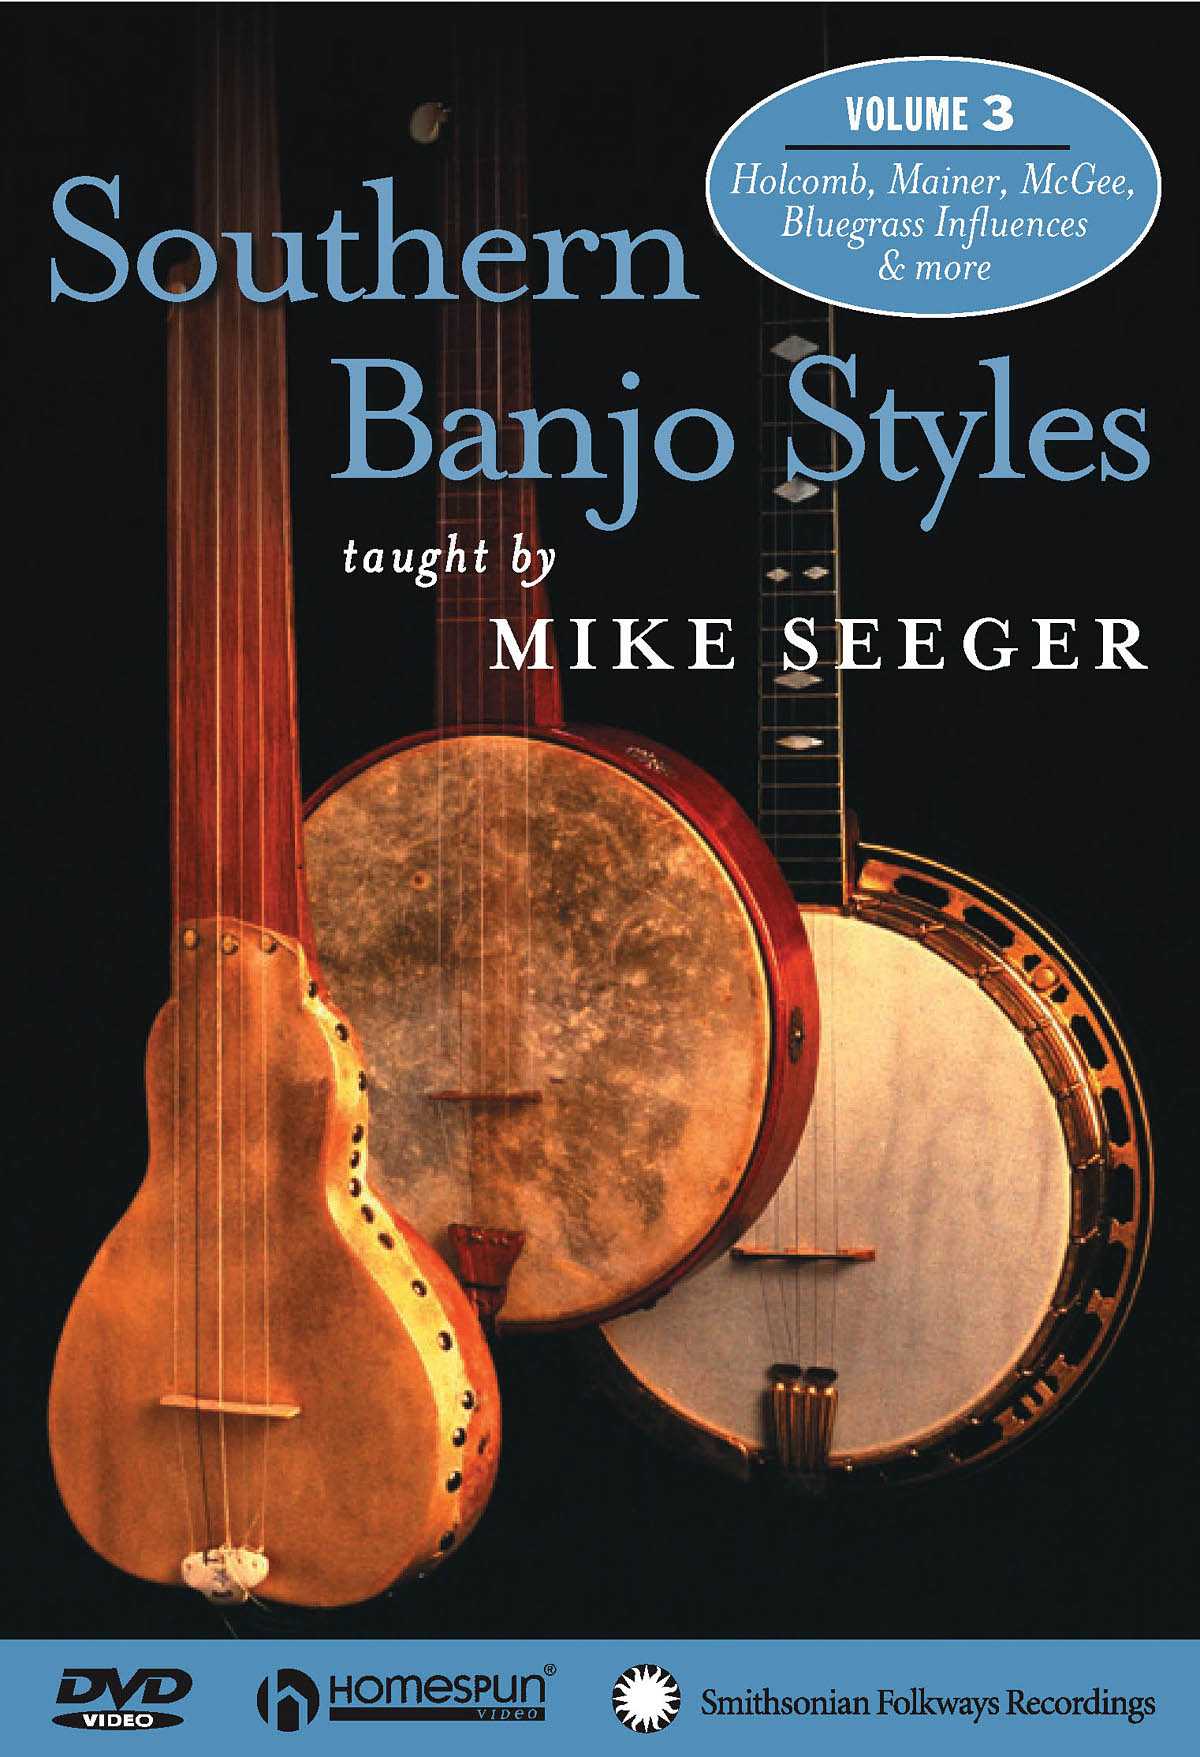 Image 1 of DOWNLOAD ONLY - Southern Banjo Styles: Vol. 3 - SKU# 300-DVD303 : Product Type Media : Elderly Instruments